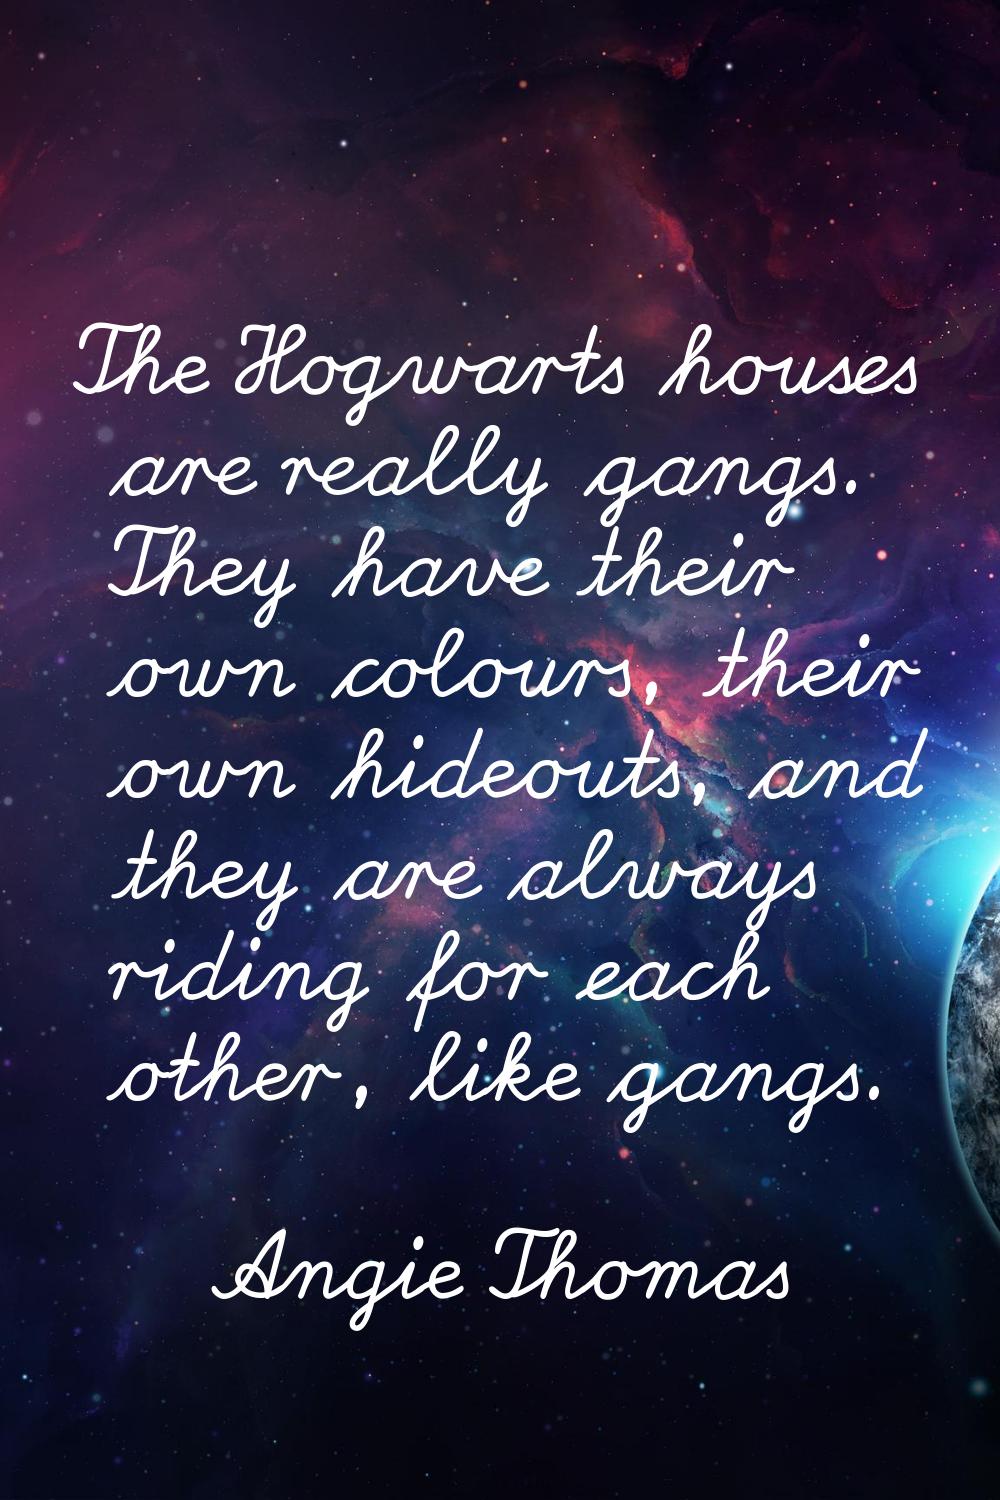 The Hogwarts houses are really gangs. They have their own colours, their own hideouts, and they are